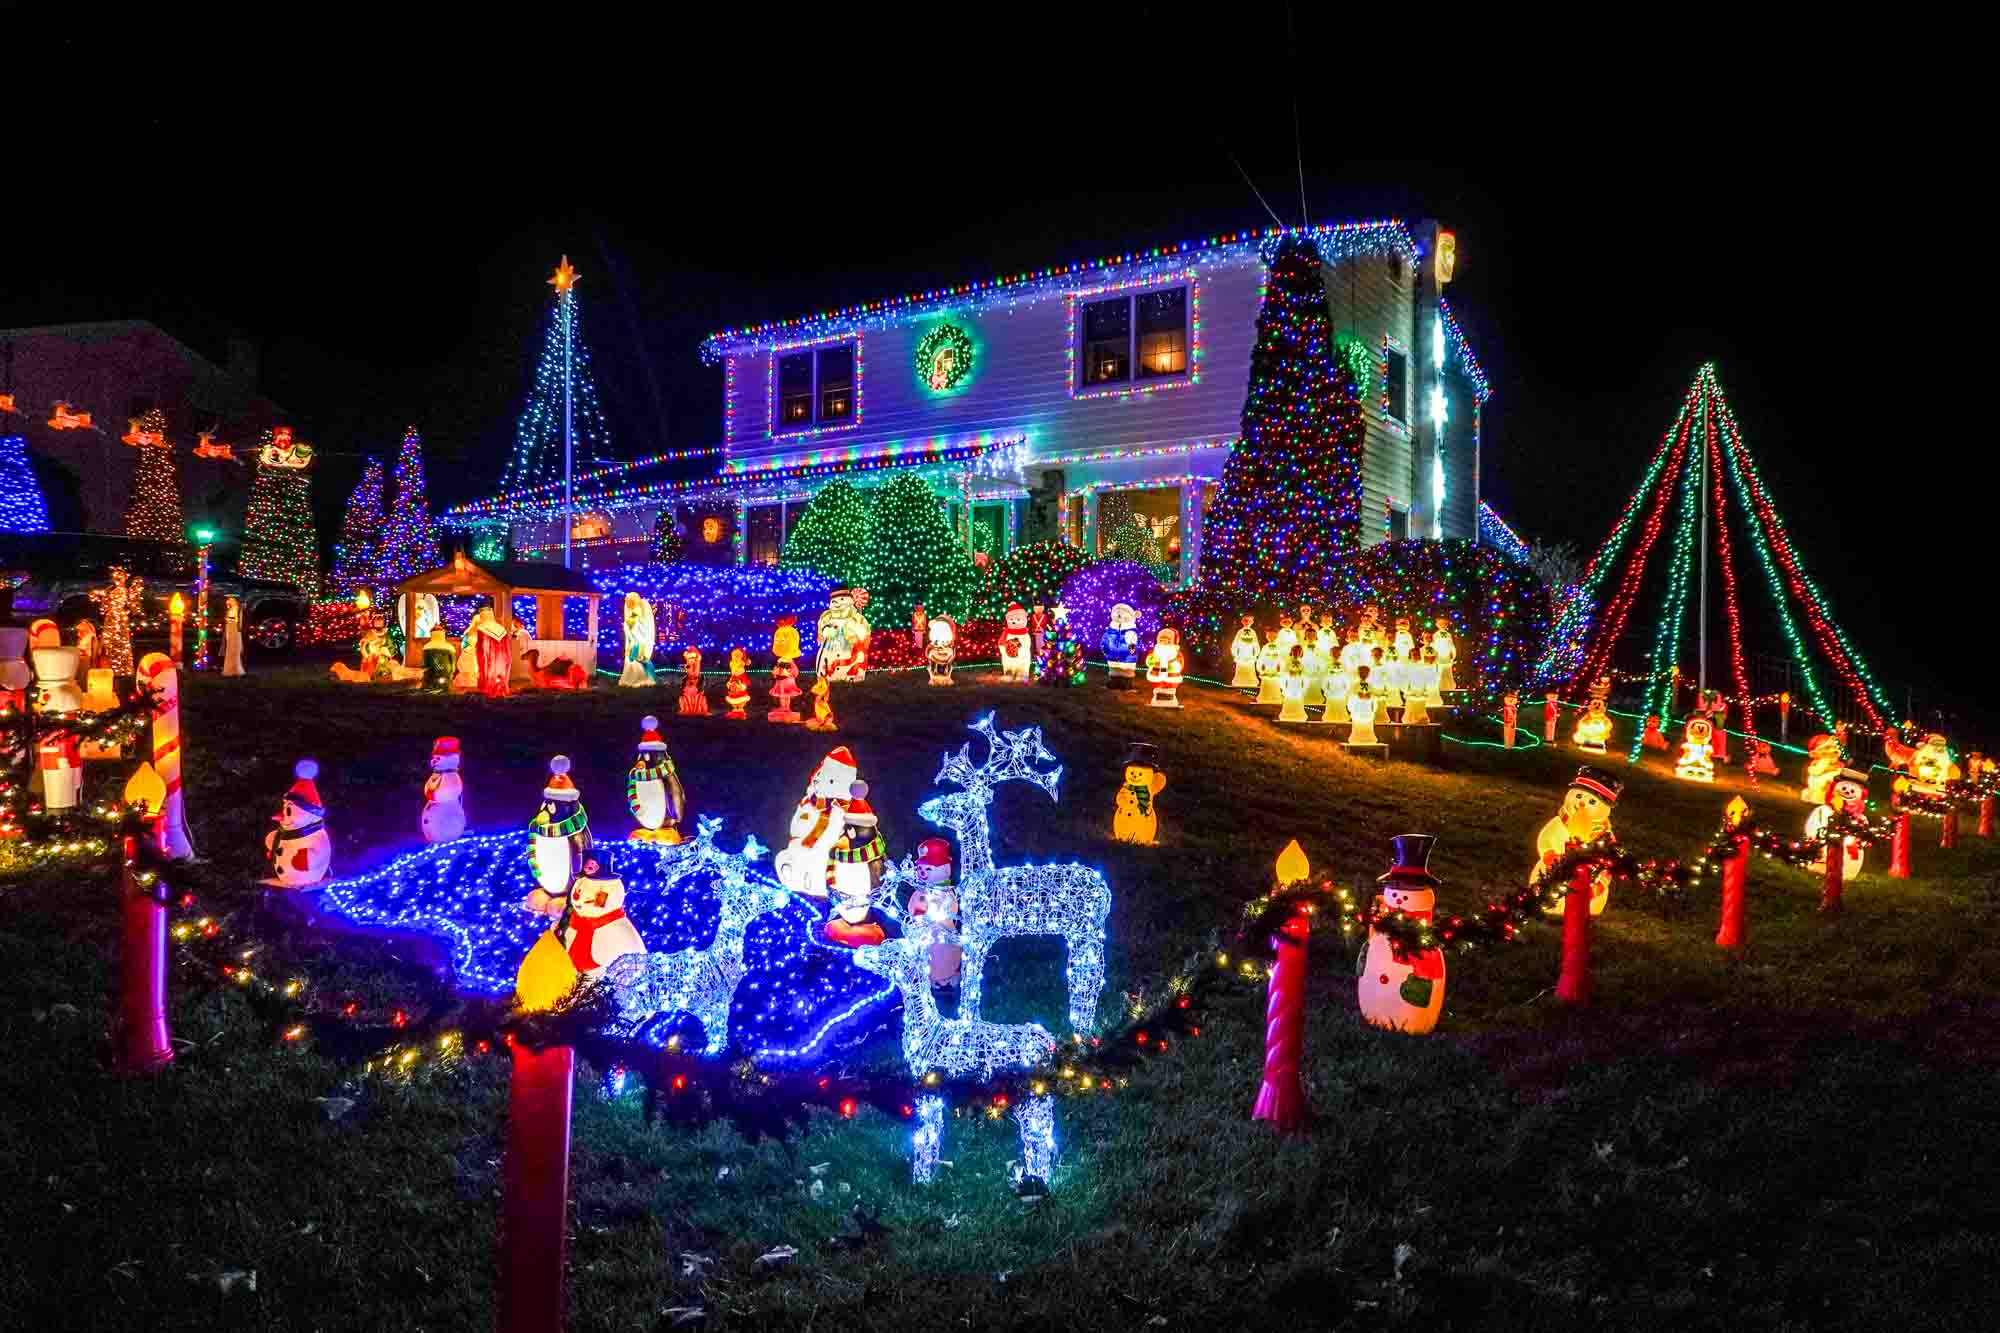 Yard packed with Christmas and winter illuminated figurines beside a house covered in lights.